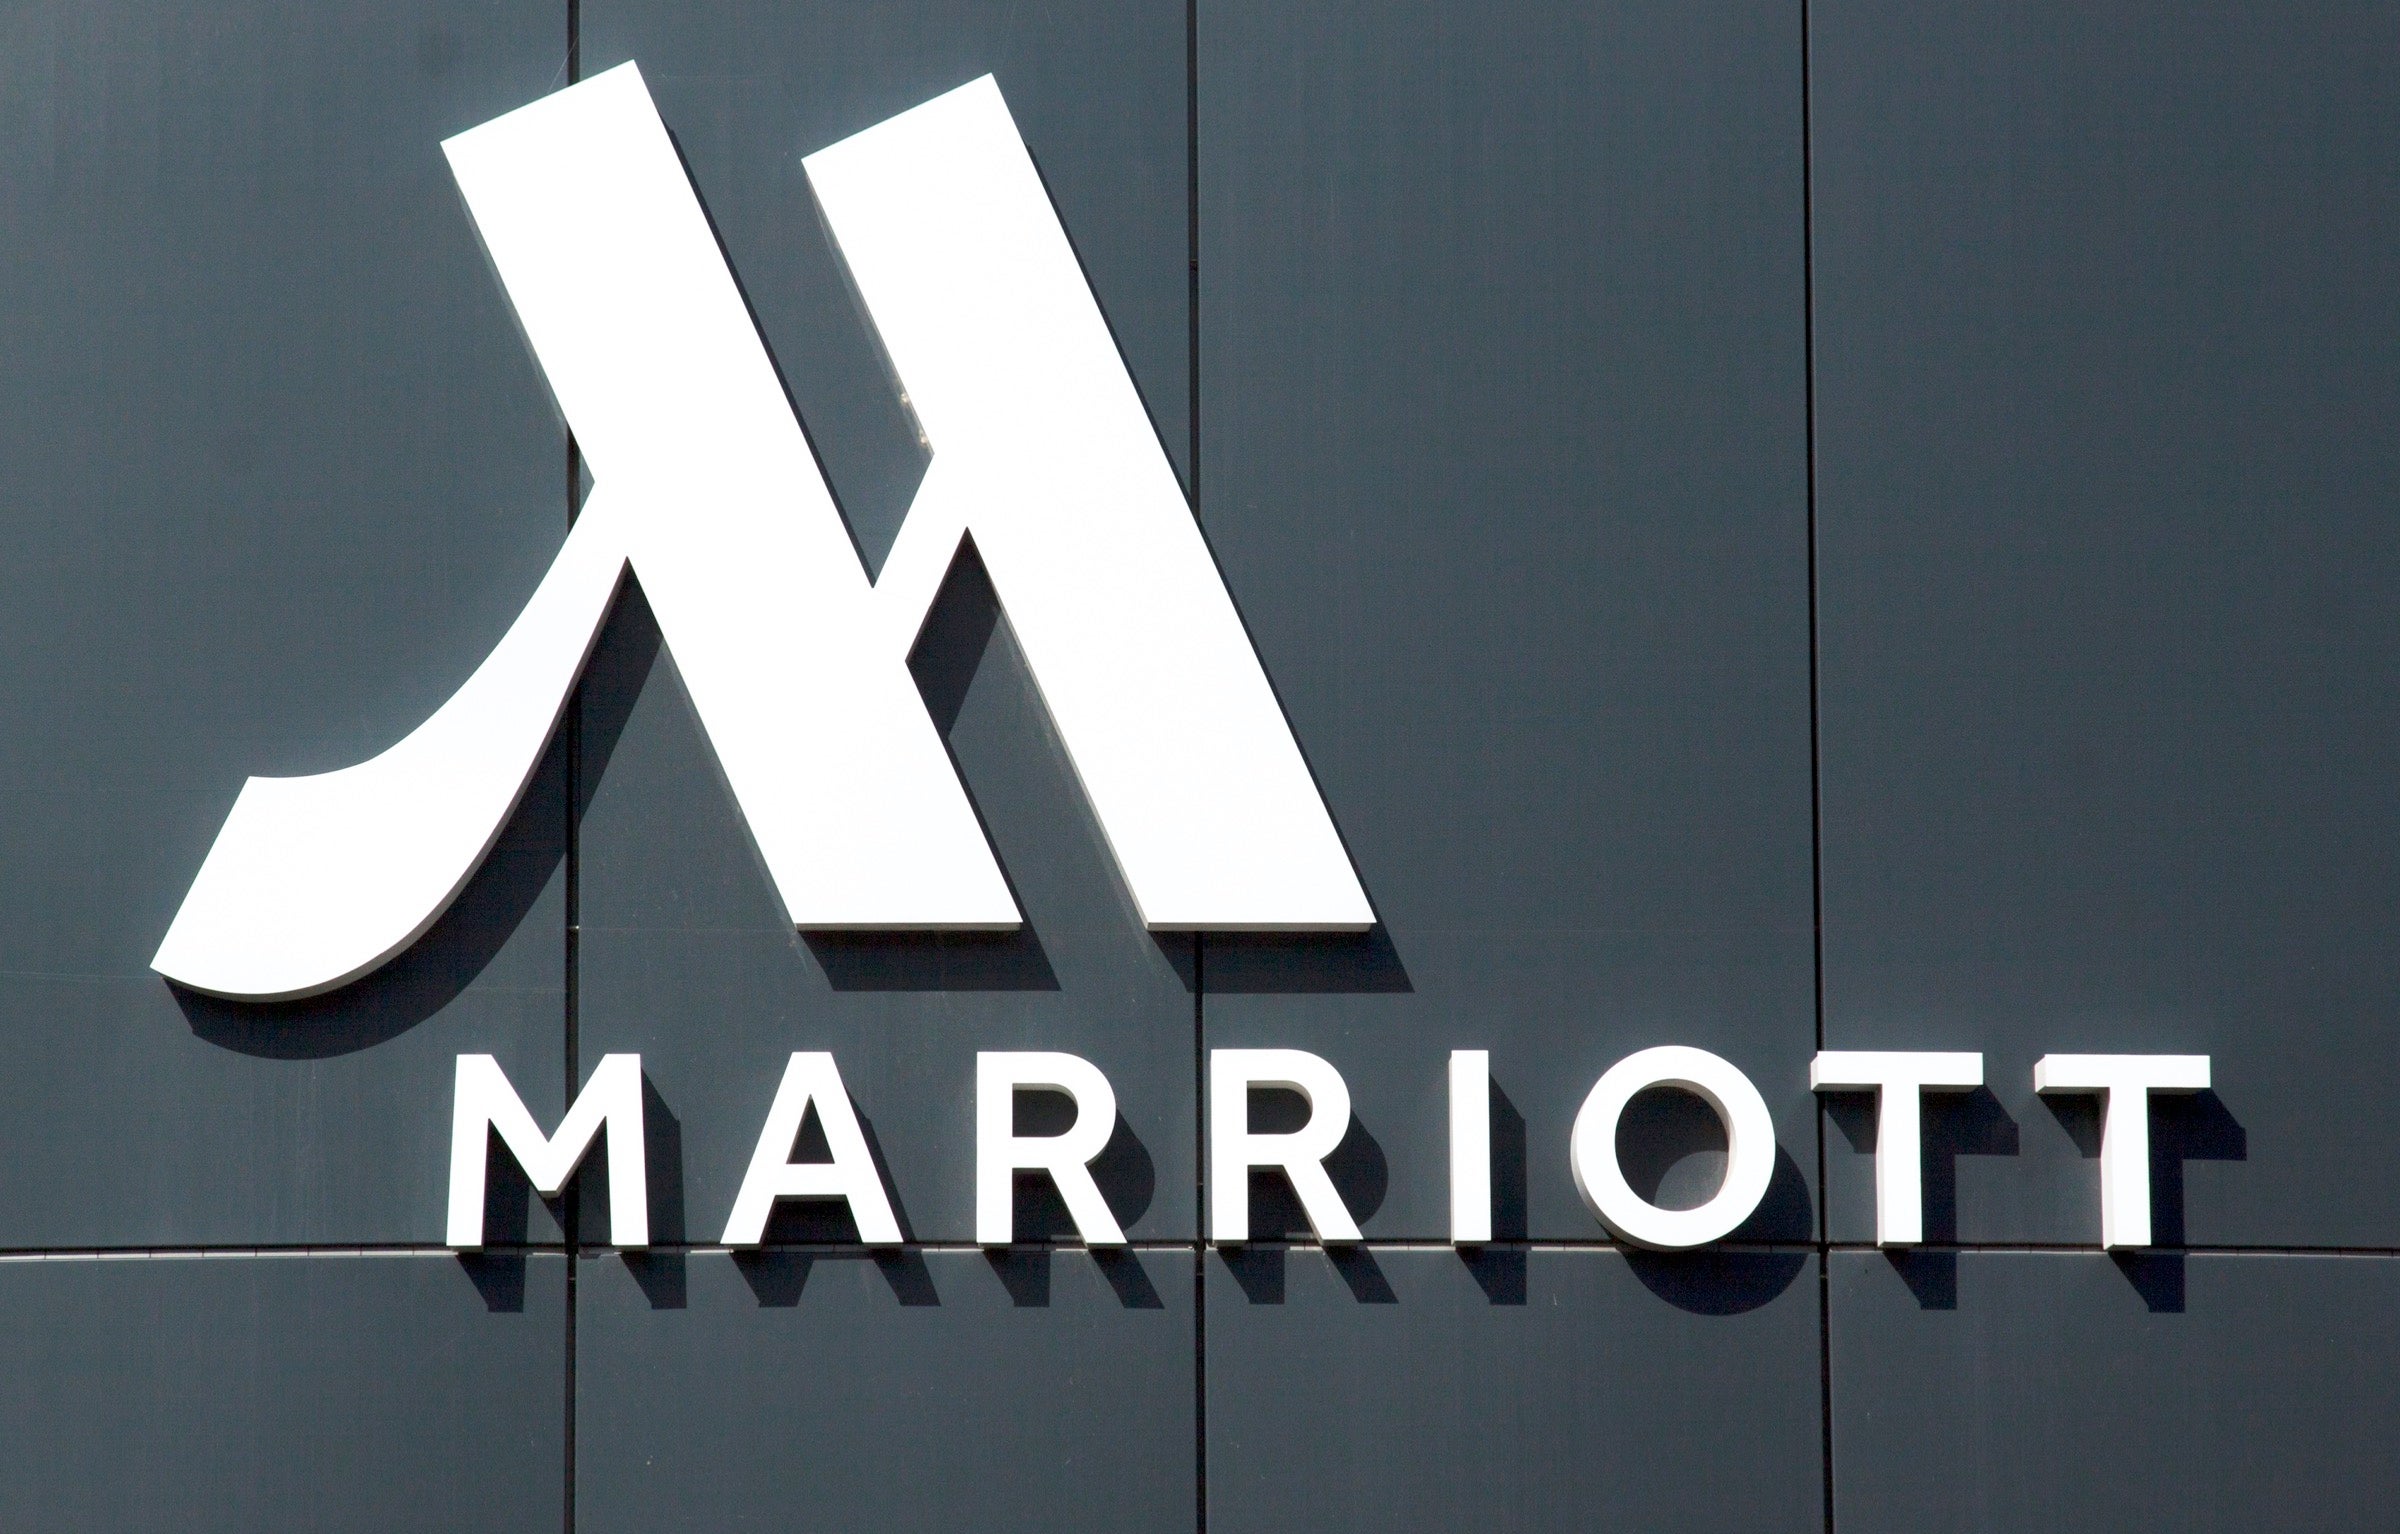 A Marriott Hotel Sign on a Gray Building